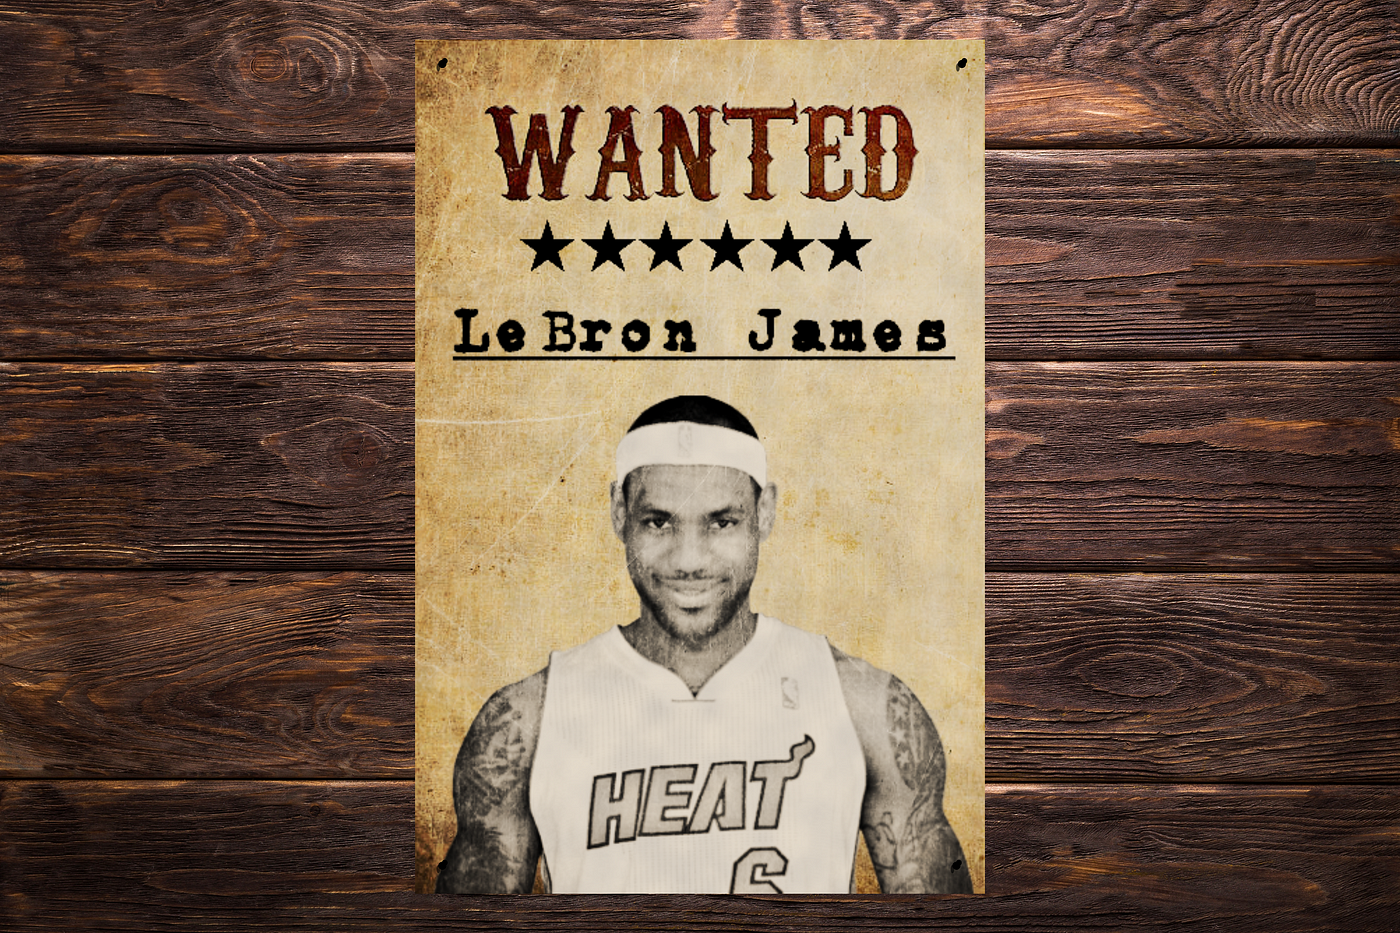 What The Hell, LA-bron